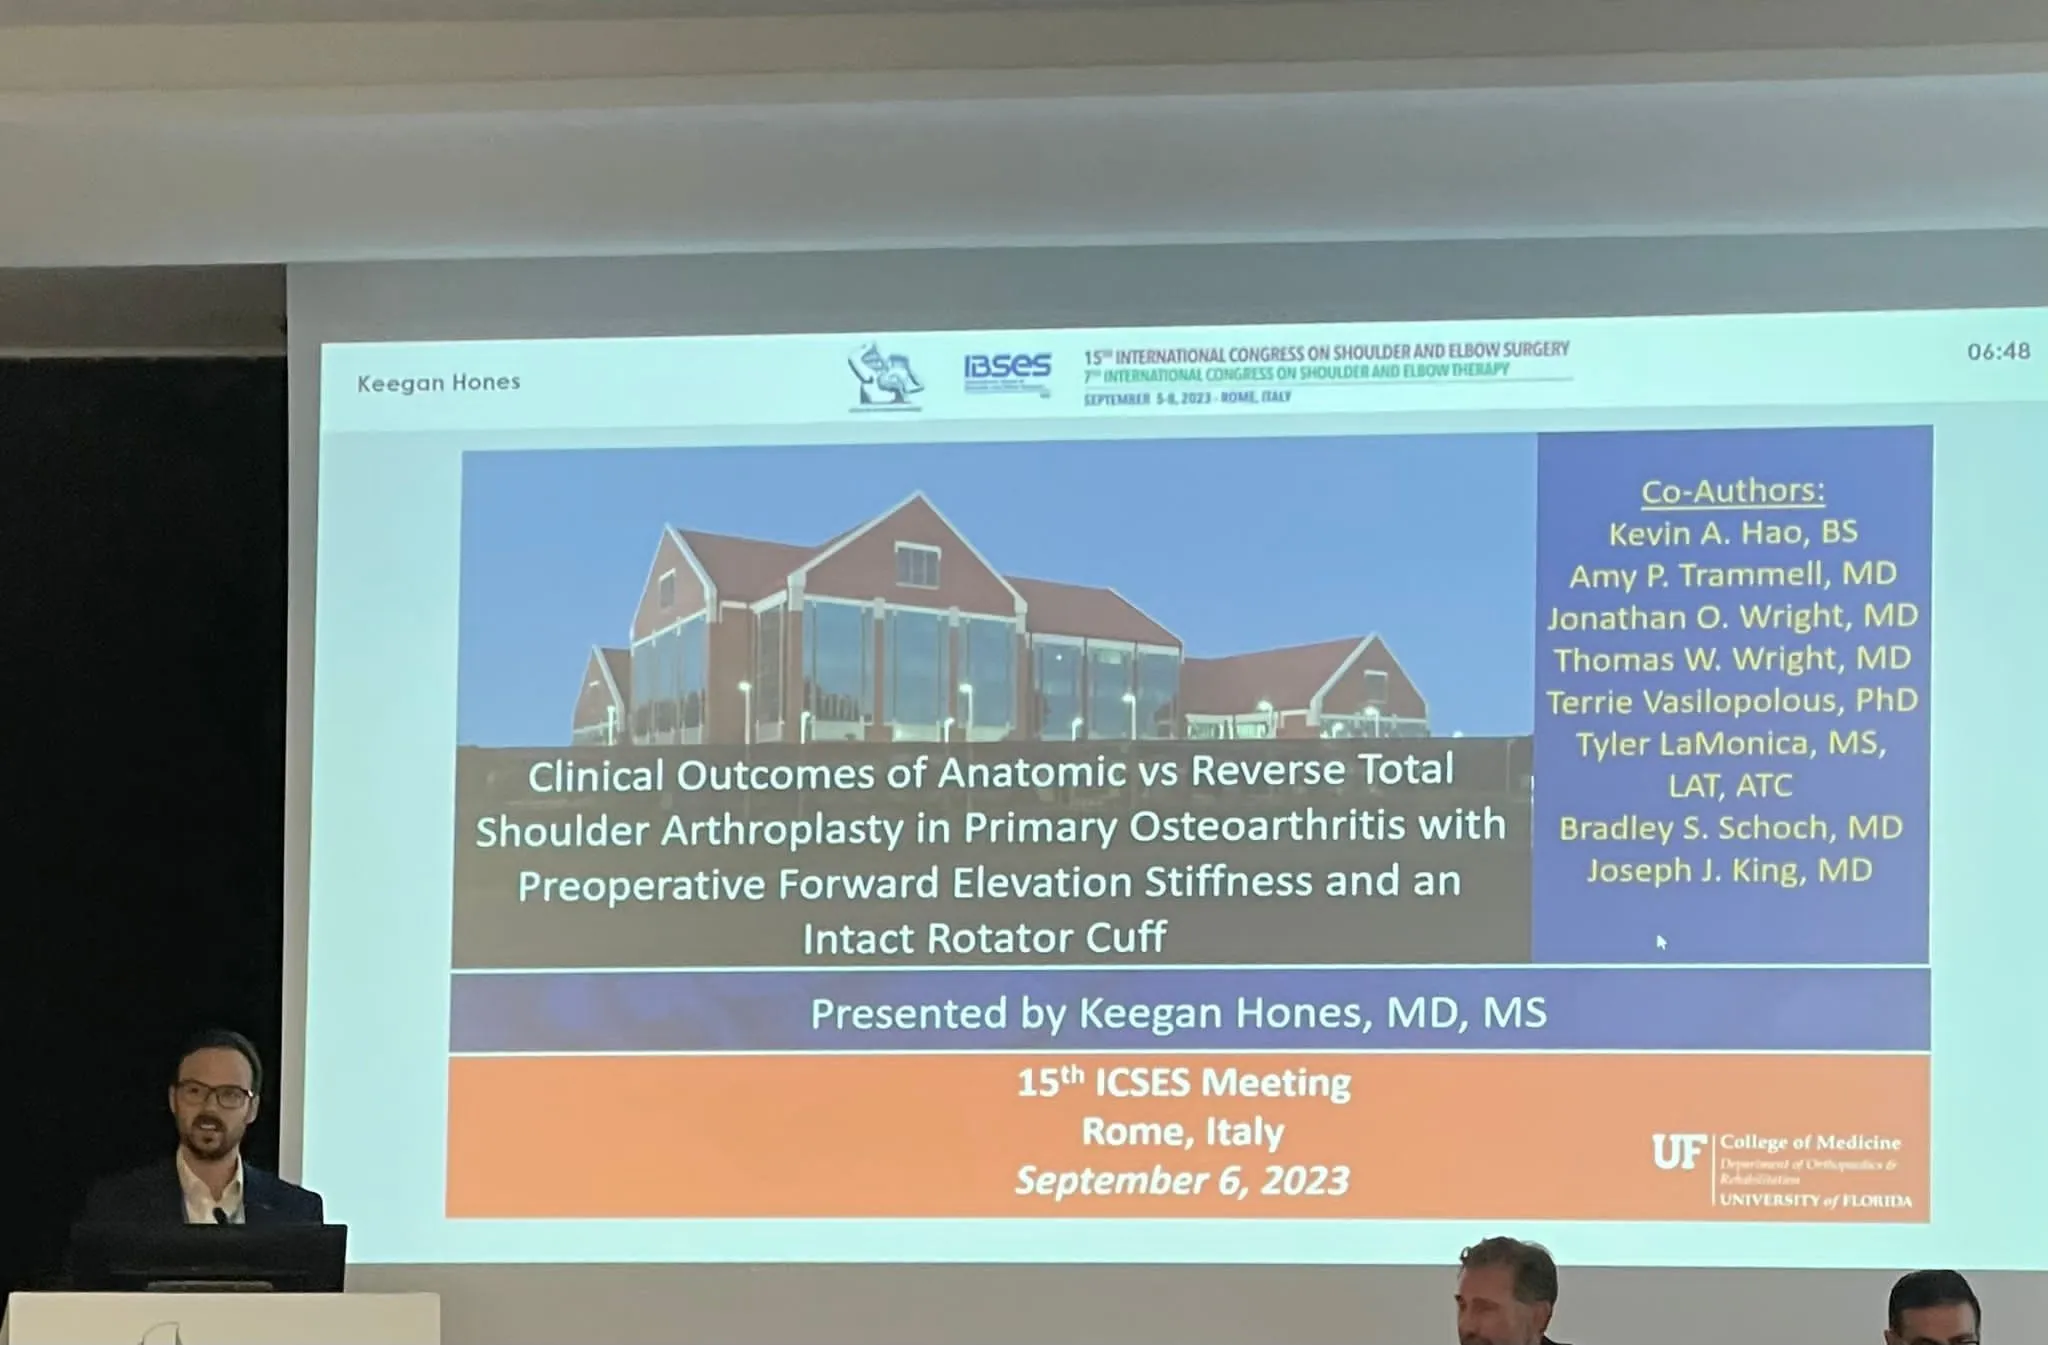 UF Ortho Hand and Upper Extremity Division presents at ICSES 2023 - Keegan Hones